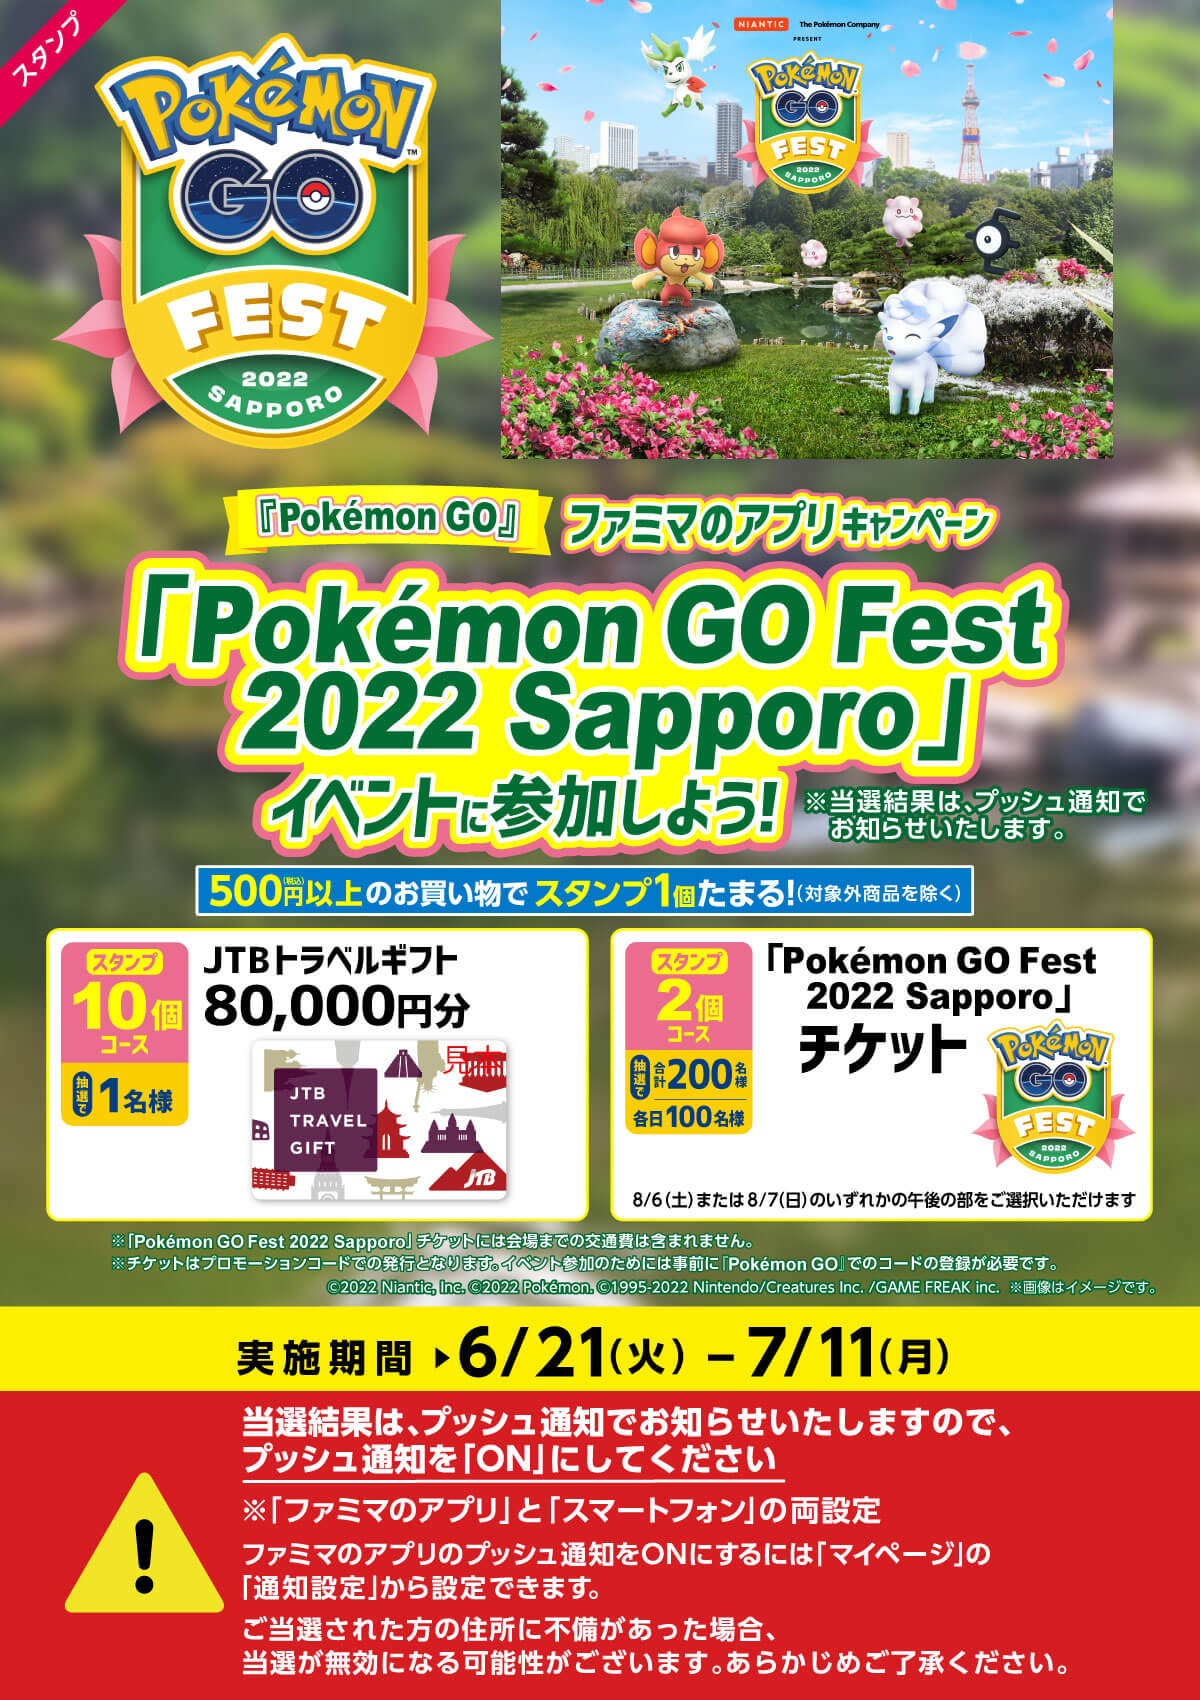 Pokemon Go Win A Ticket At Familymart A Gift Card Worth 80 000 Yen Campaign Details Appbank Newsdirectory3 Com News Directory 3